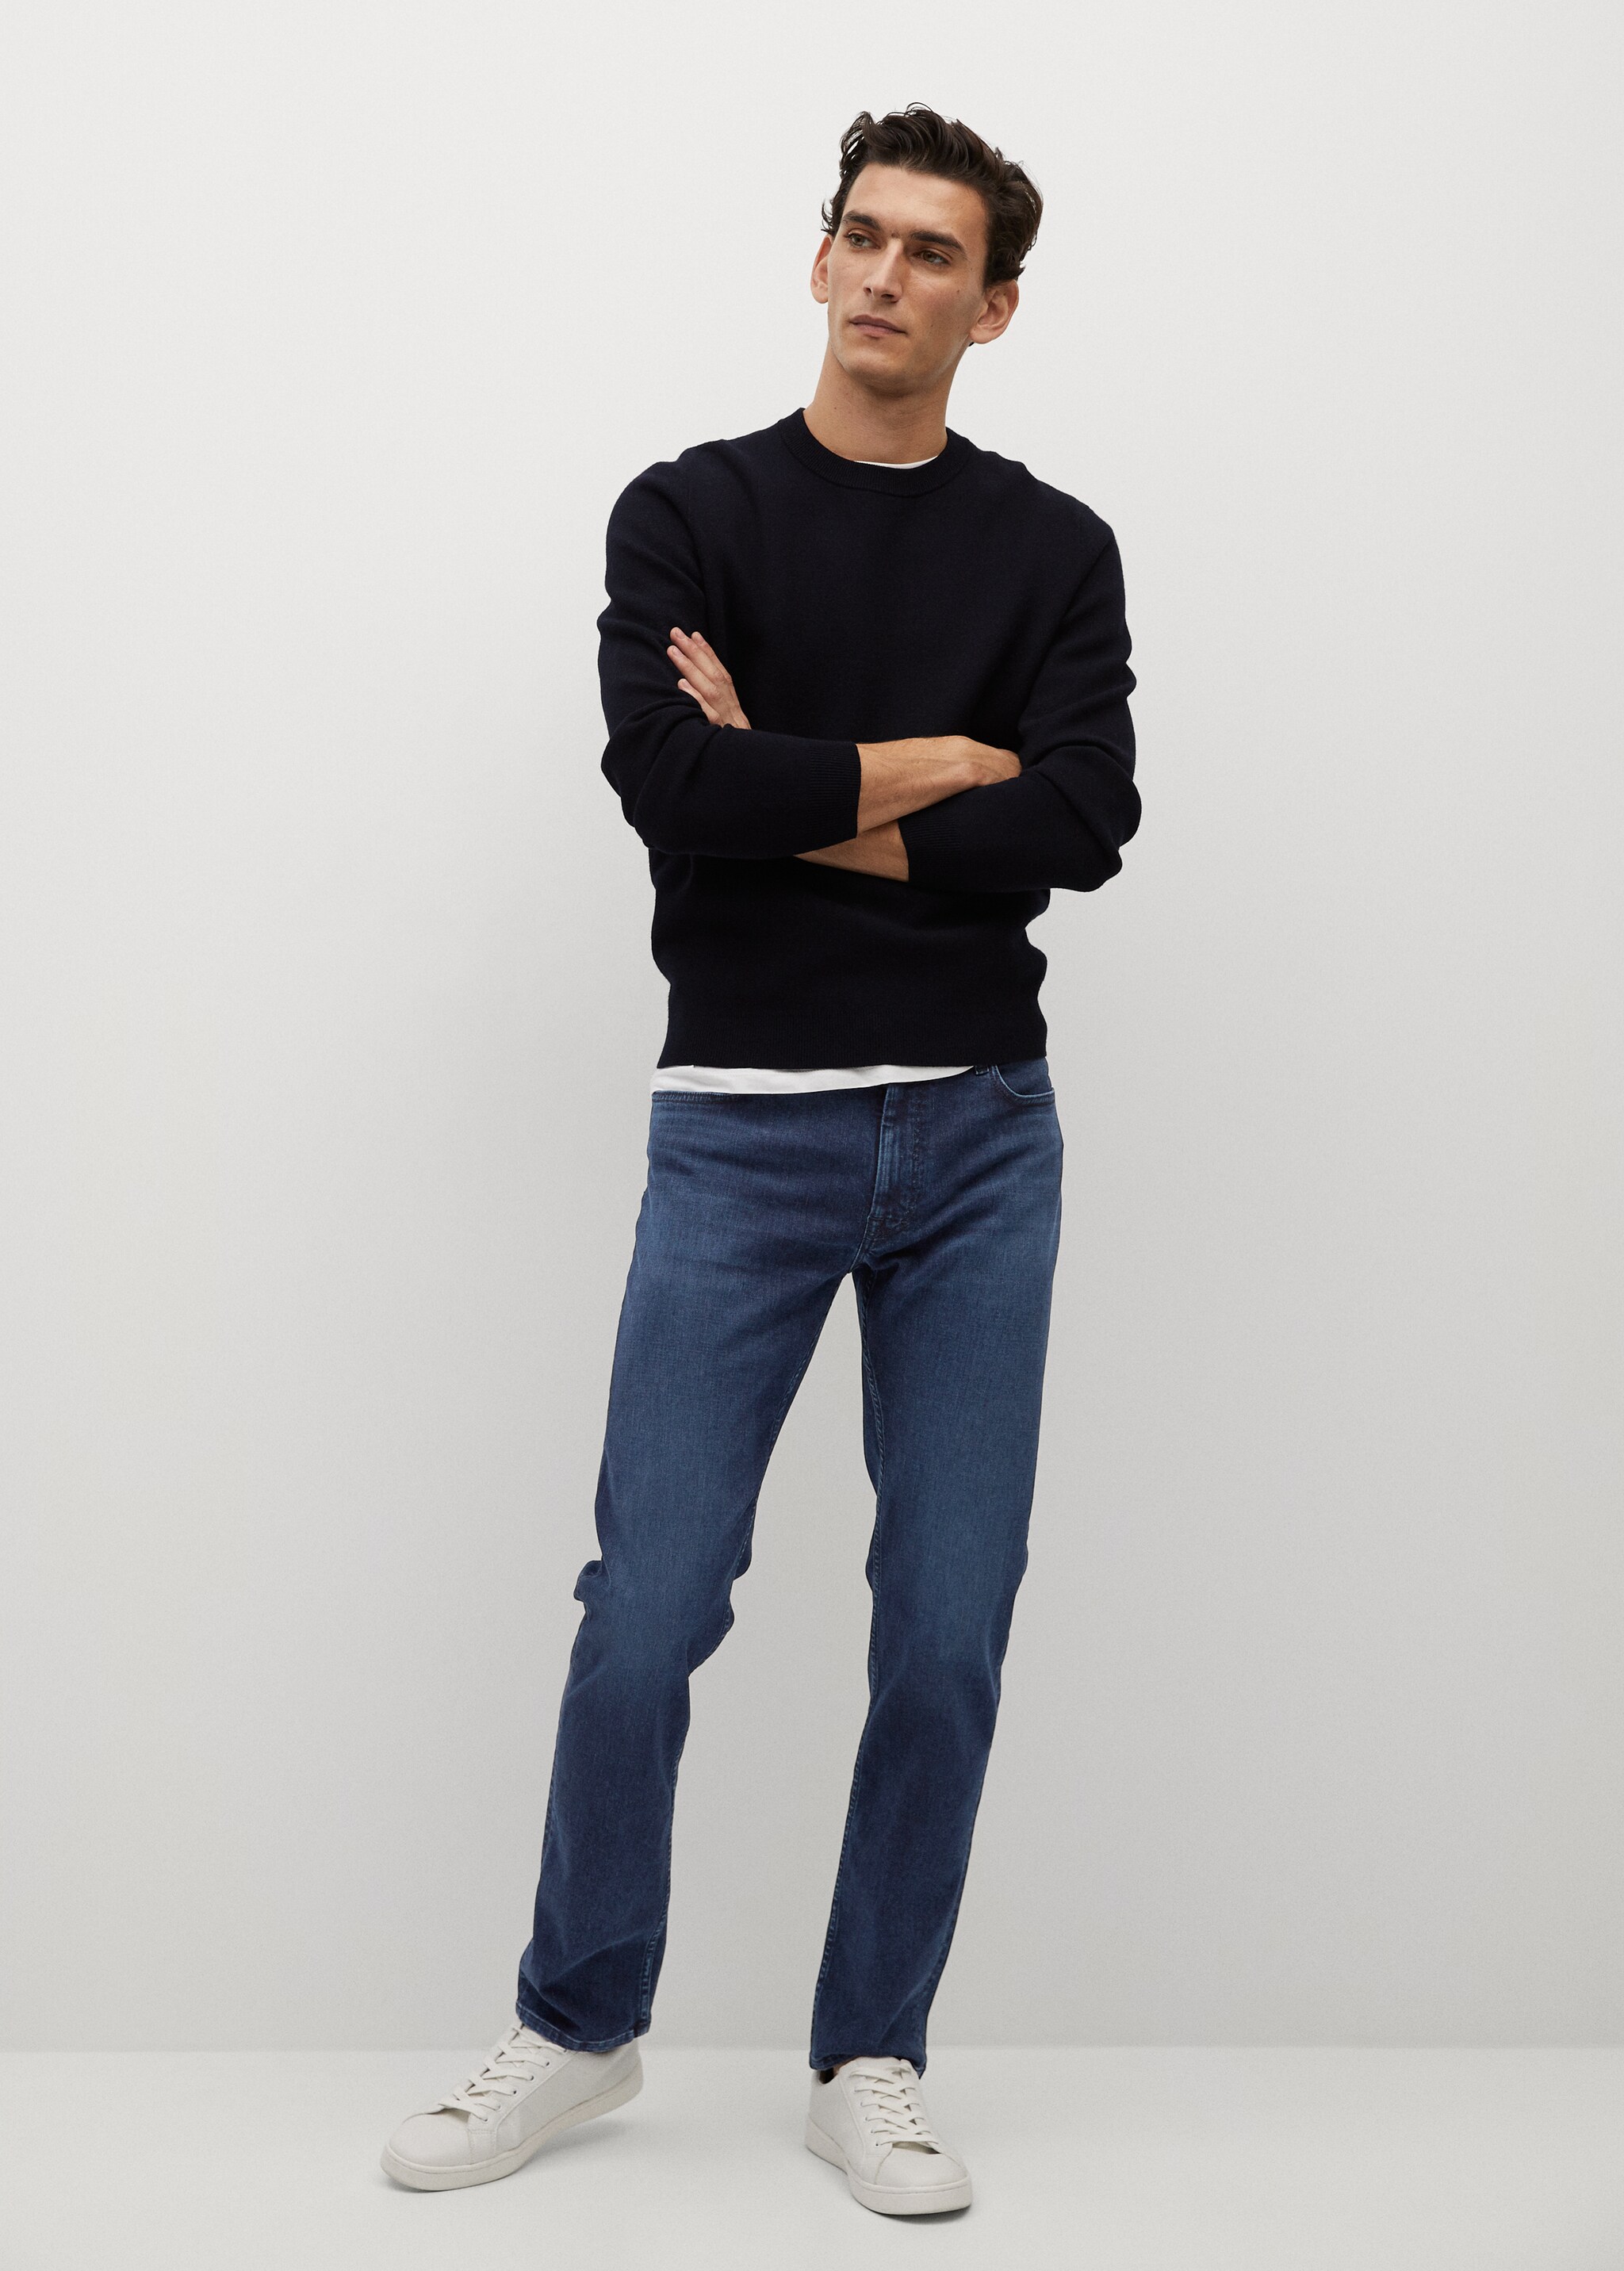 Slim fit Ultra Soft Touch Patrick jeans - General plane